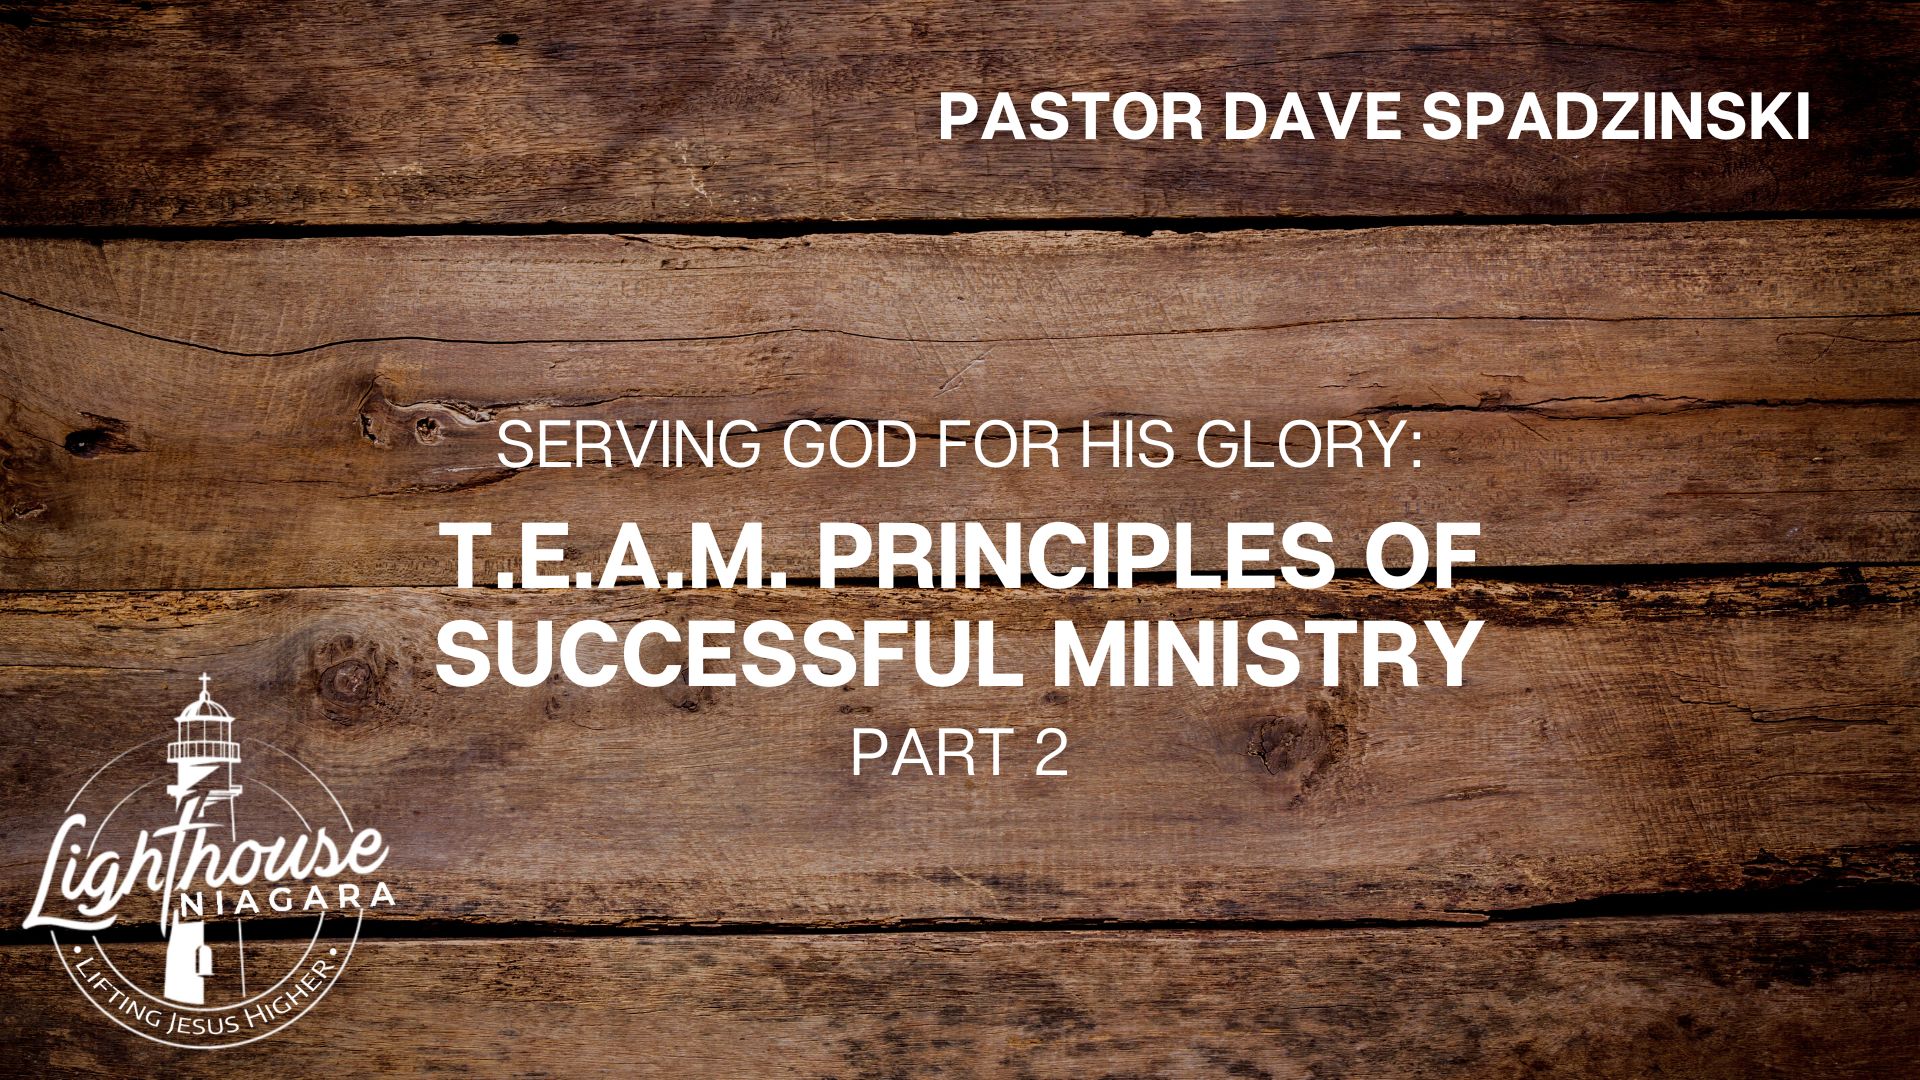 Serving God For His Glory: T.E.A.M. Principles of Successful Ministry - Pastor Dave Spadzinski